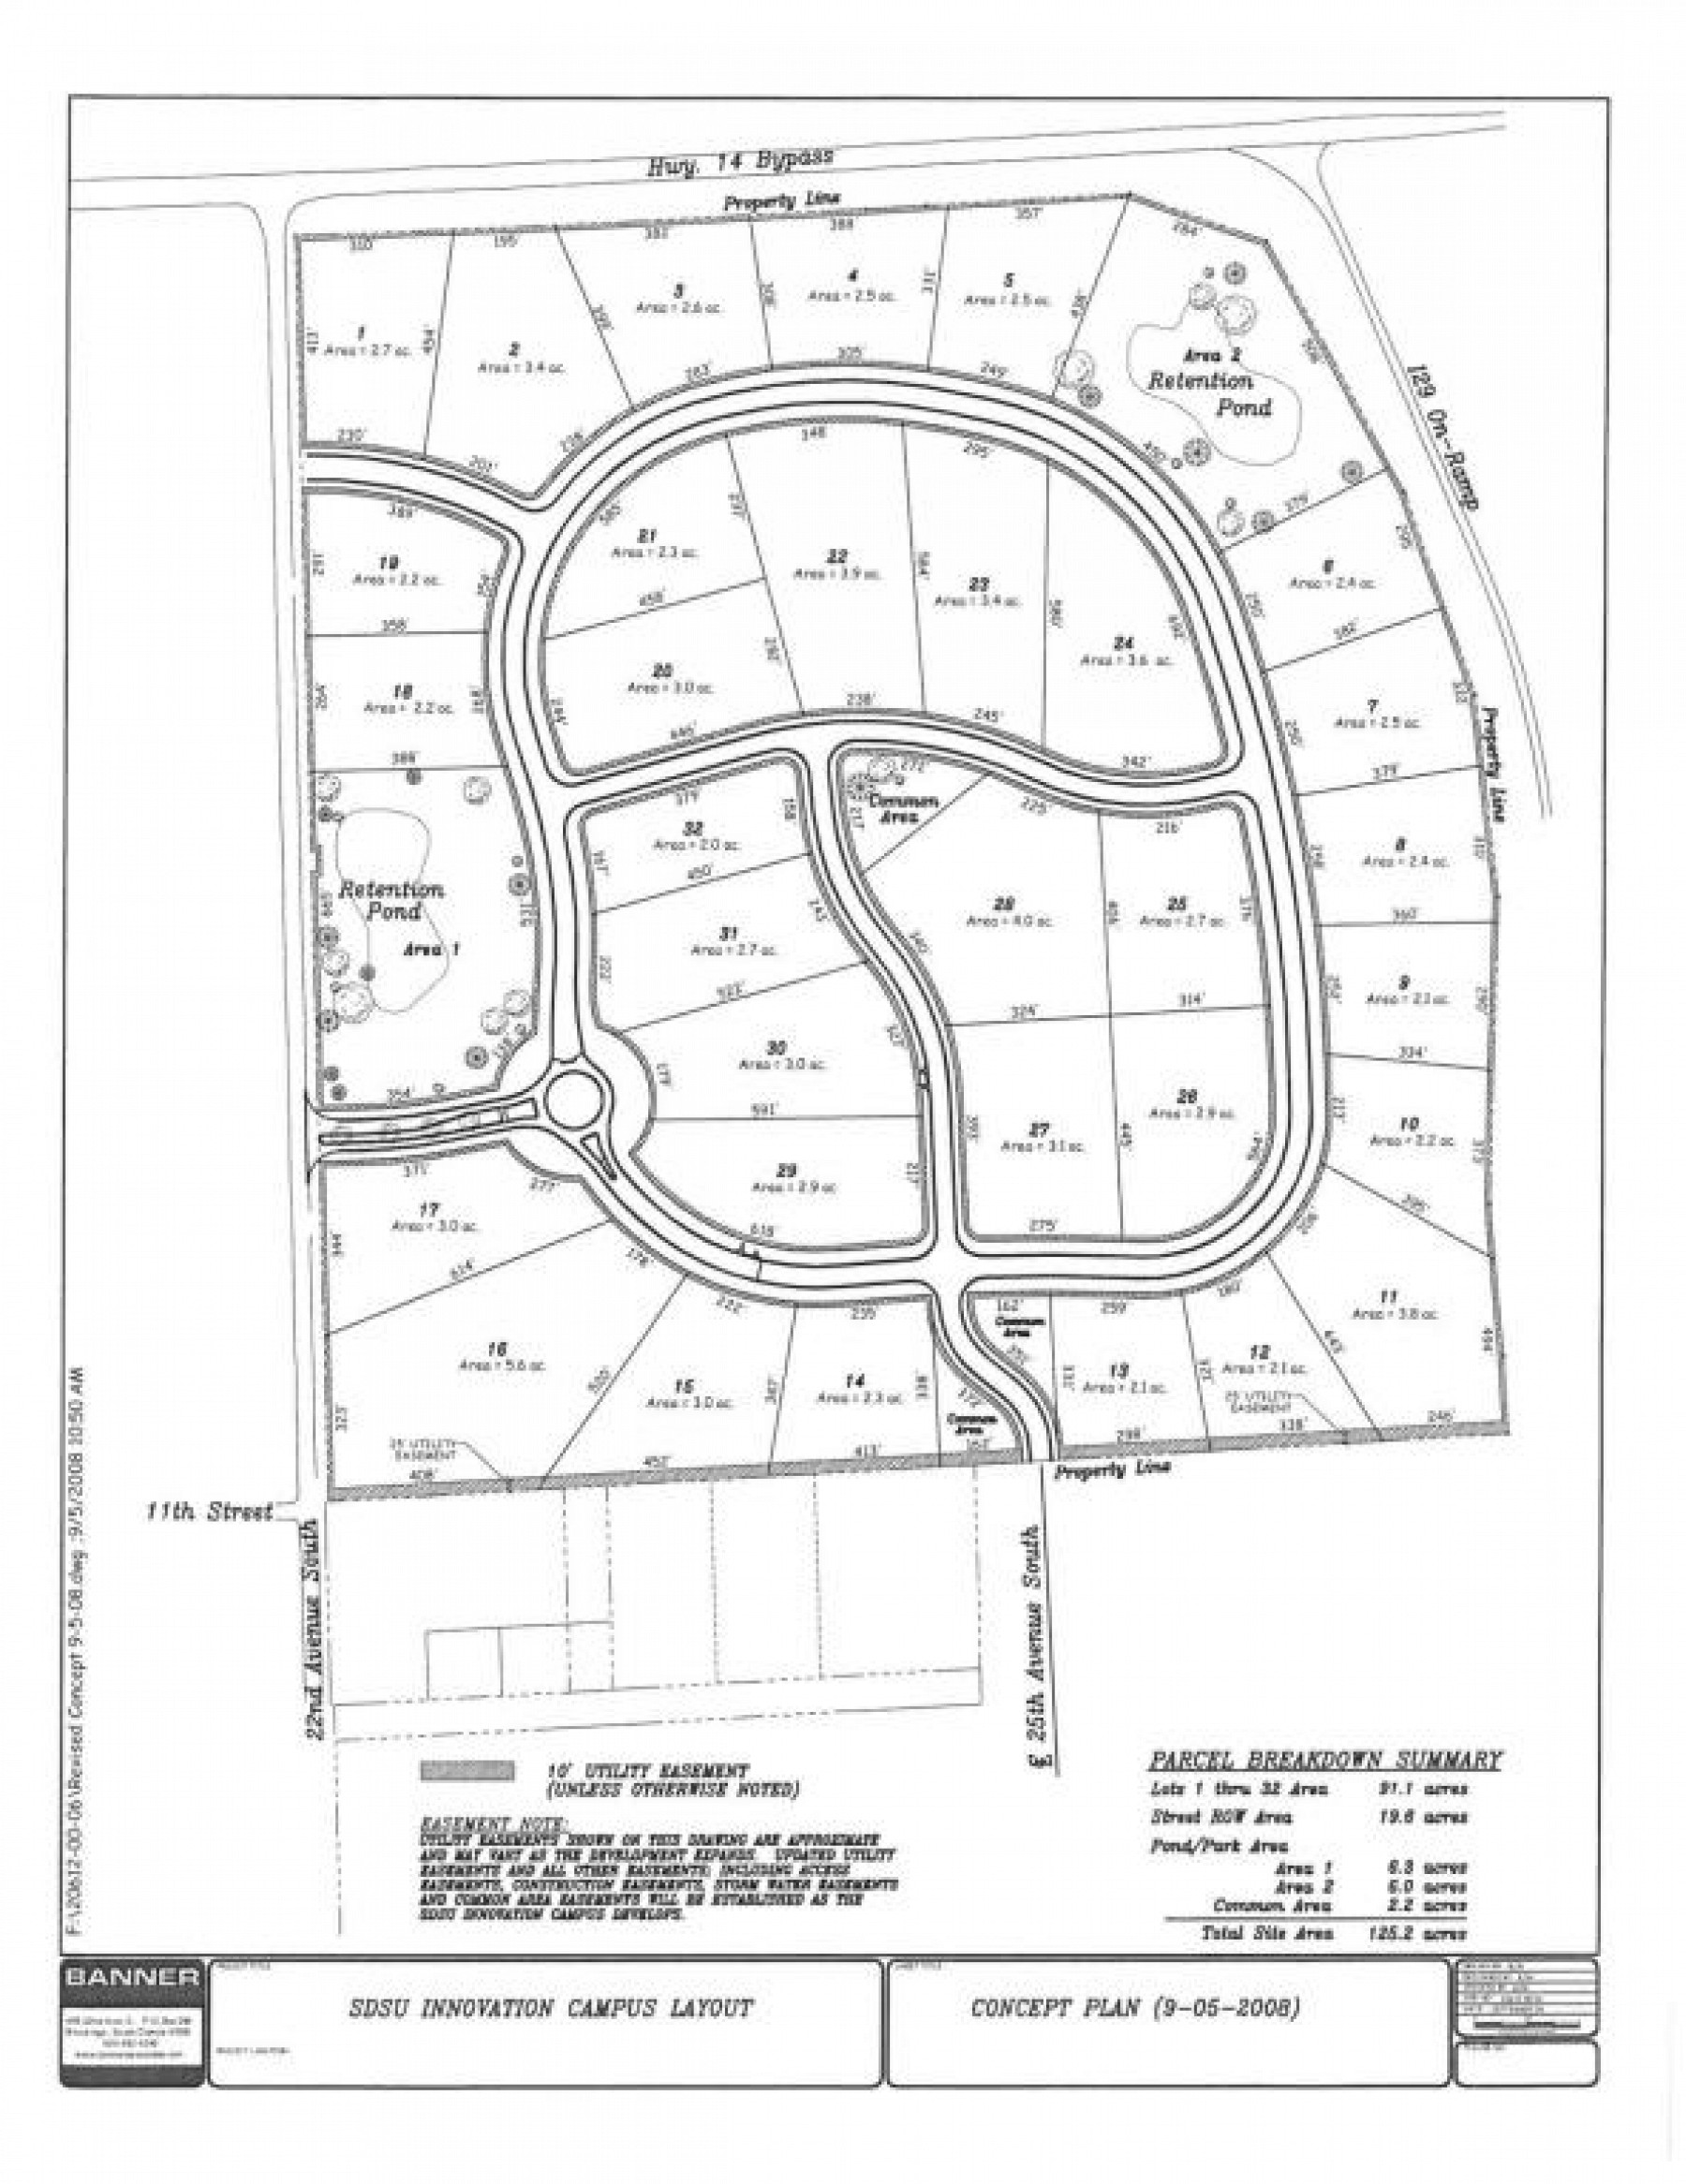 Lot 25 Innovation Campus, Brookings, SD 57006